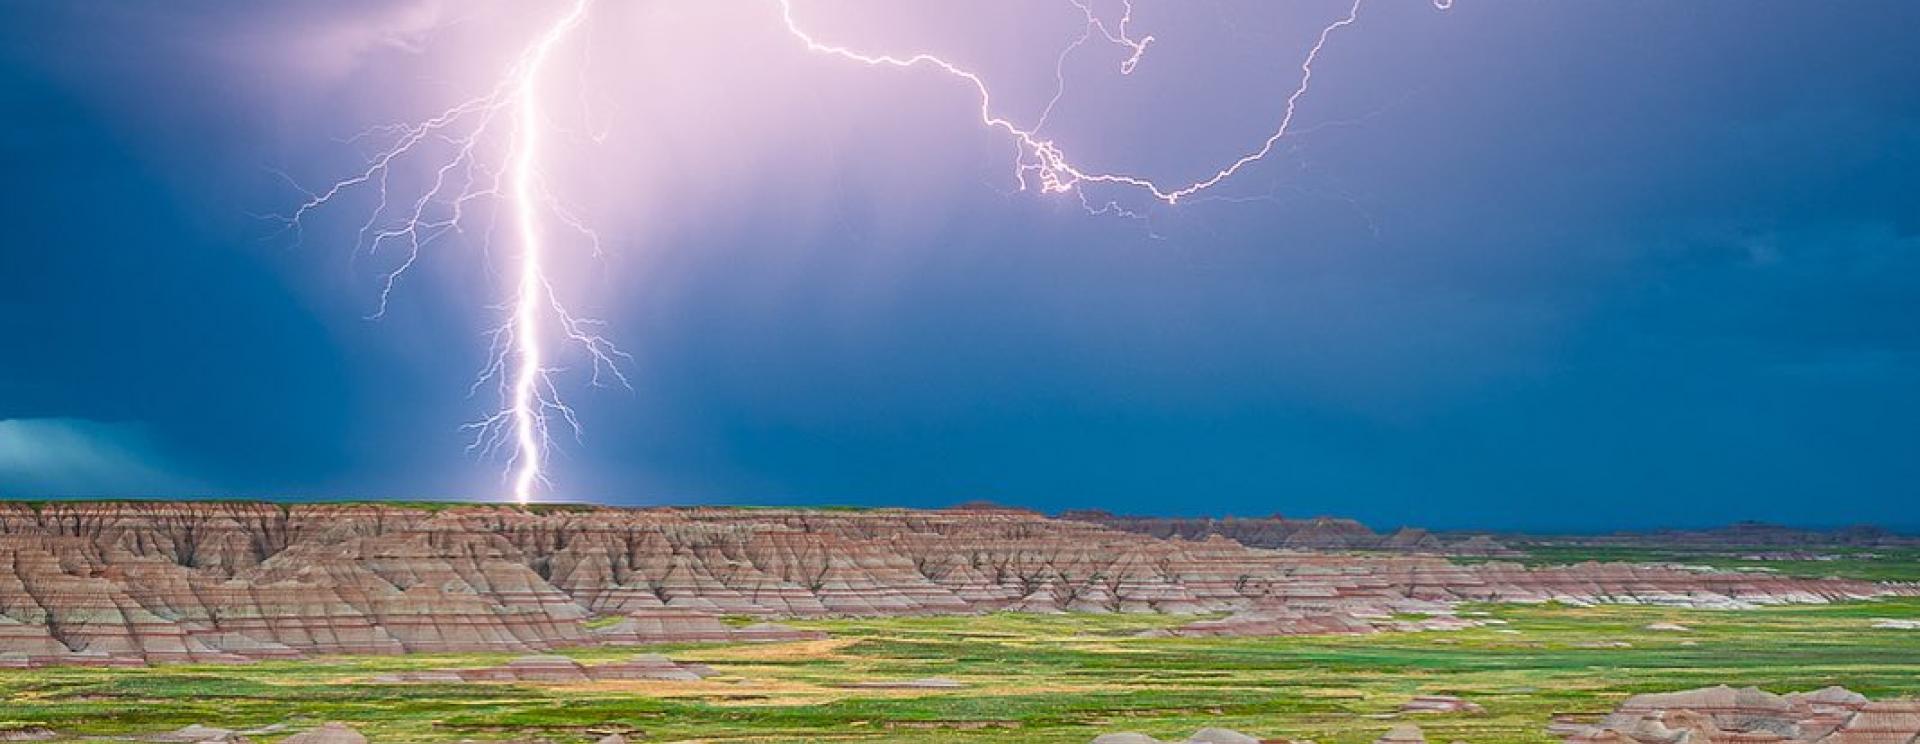 The 5 Most Remarkable Photos of the Black Hills and Badlands in July 2020